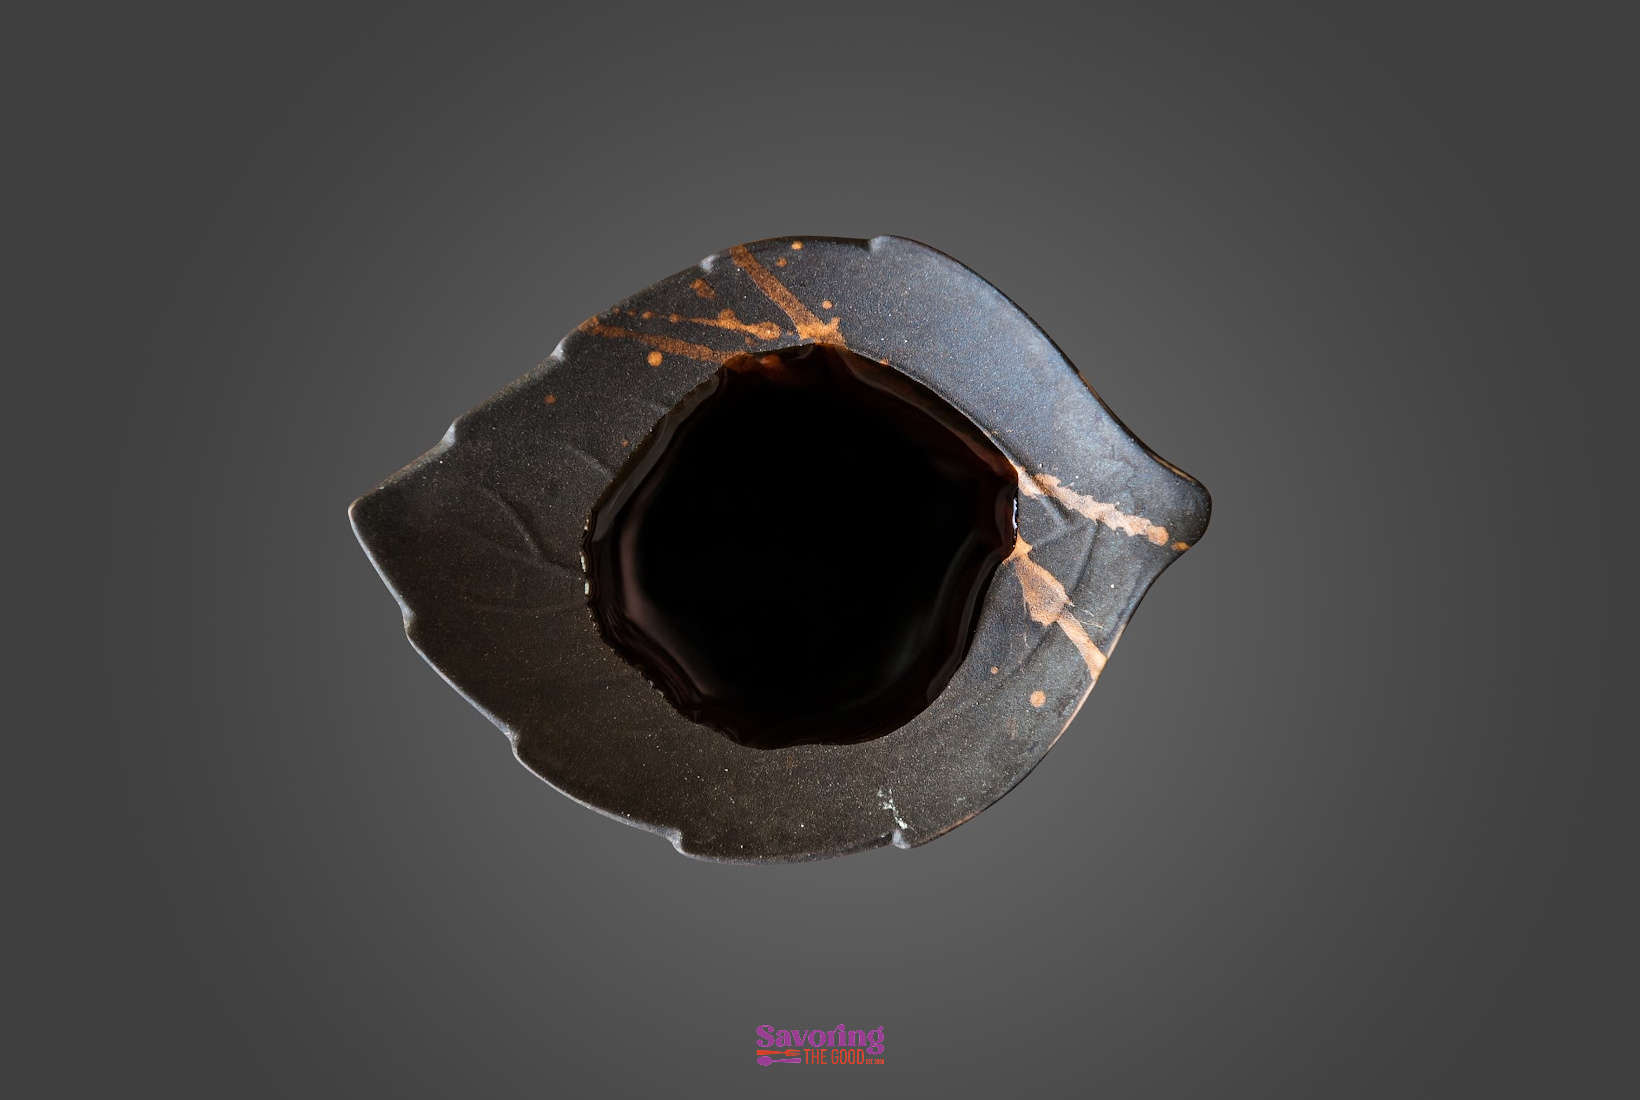 soy sauce in a black leaf shaped bowl on a dark background.